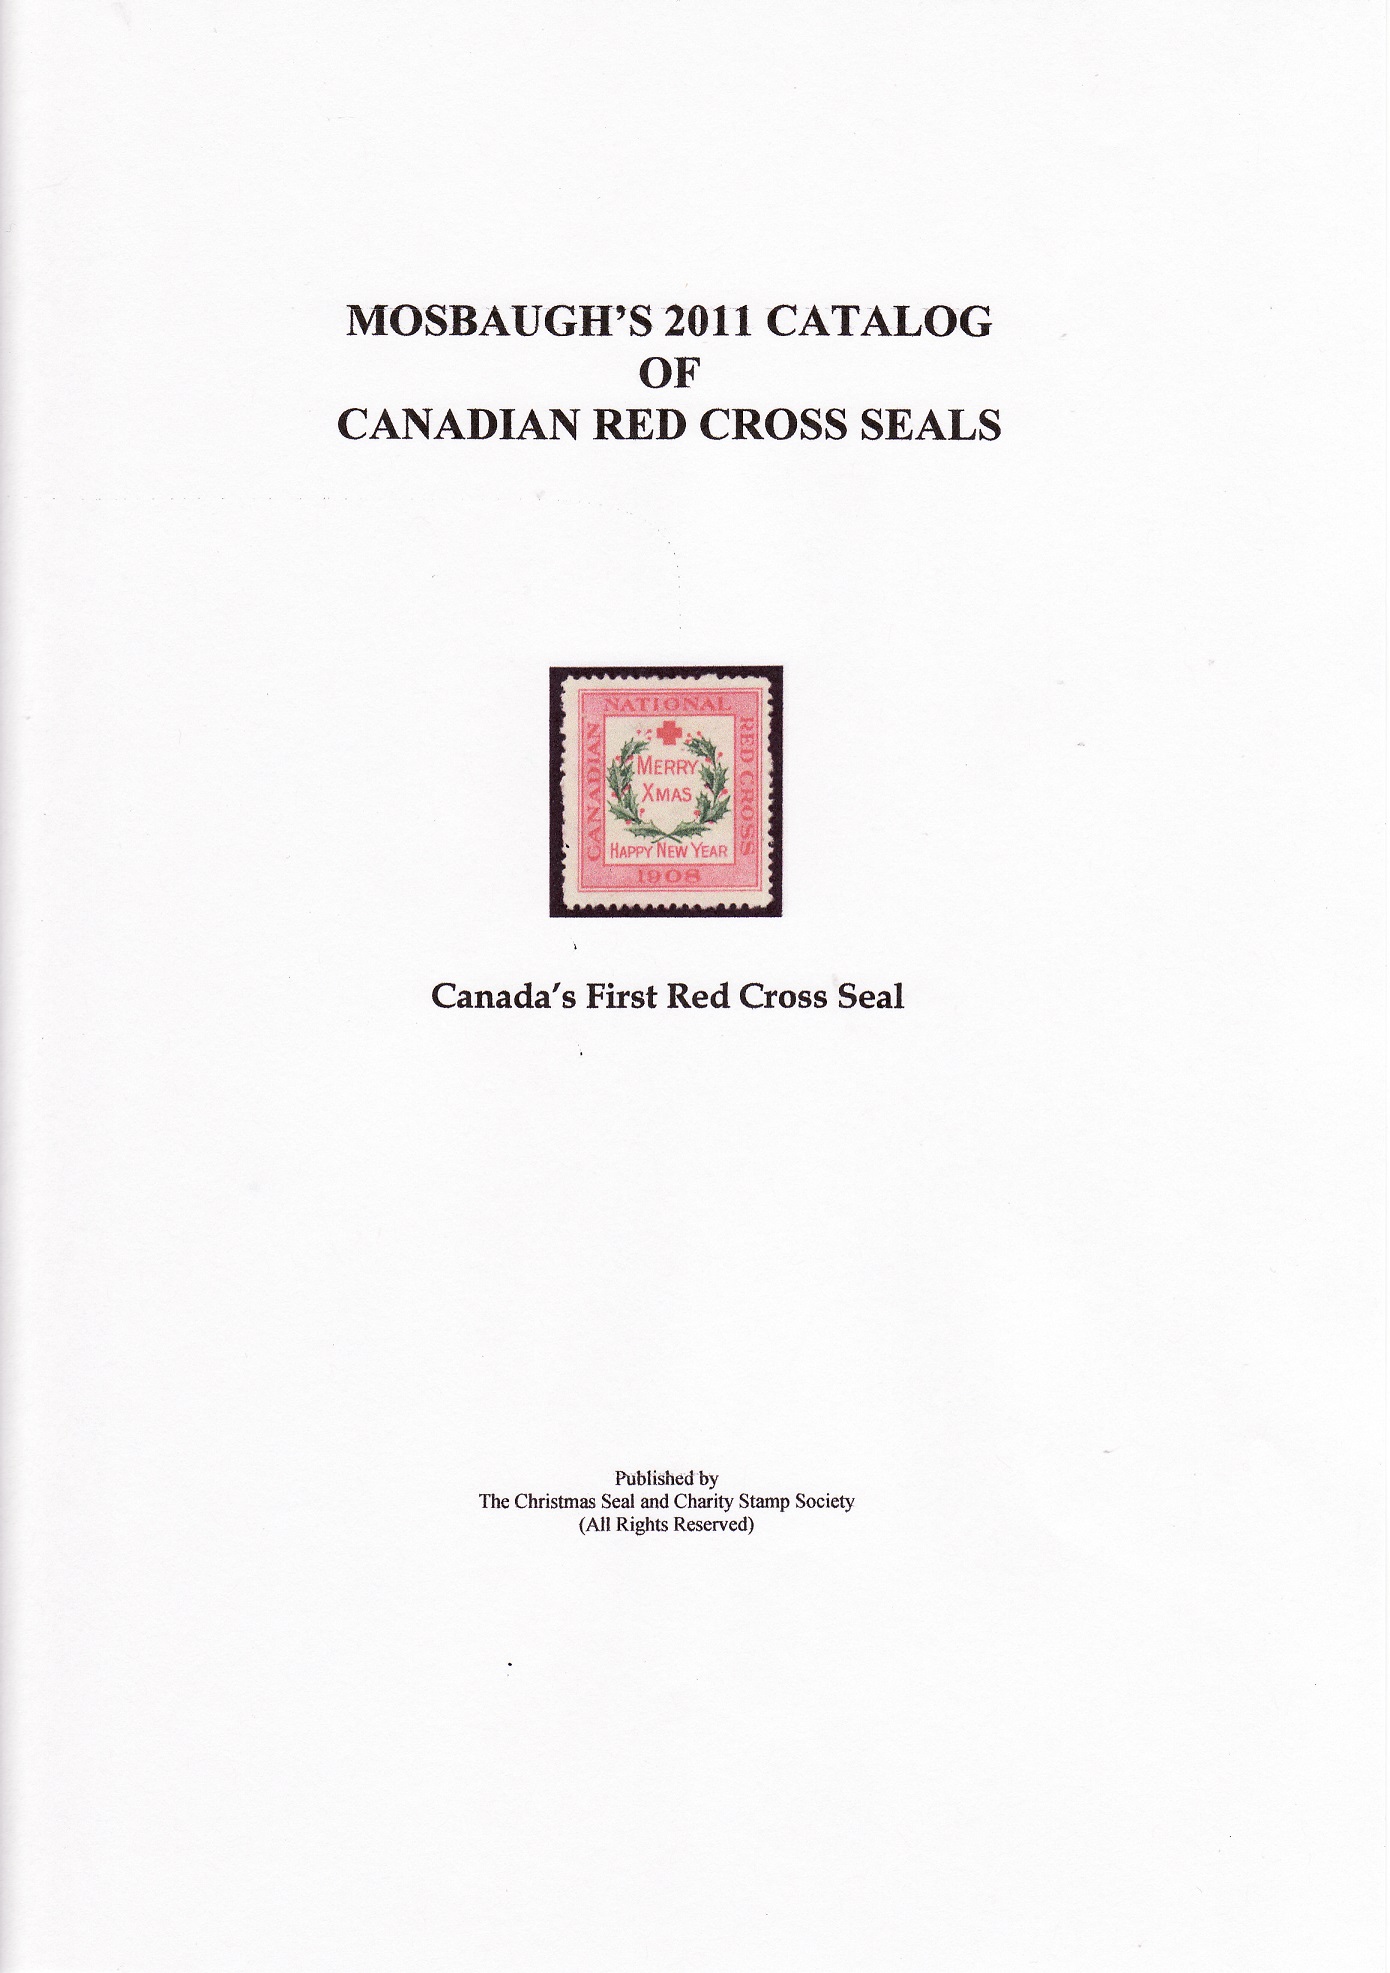 Mosbaugh's Catalog, Canadian Red Cross Seals, 2011 ed. CD, Catalog Cover